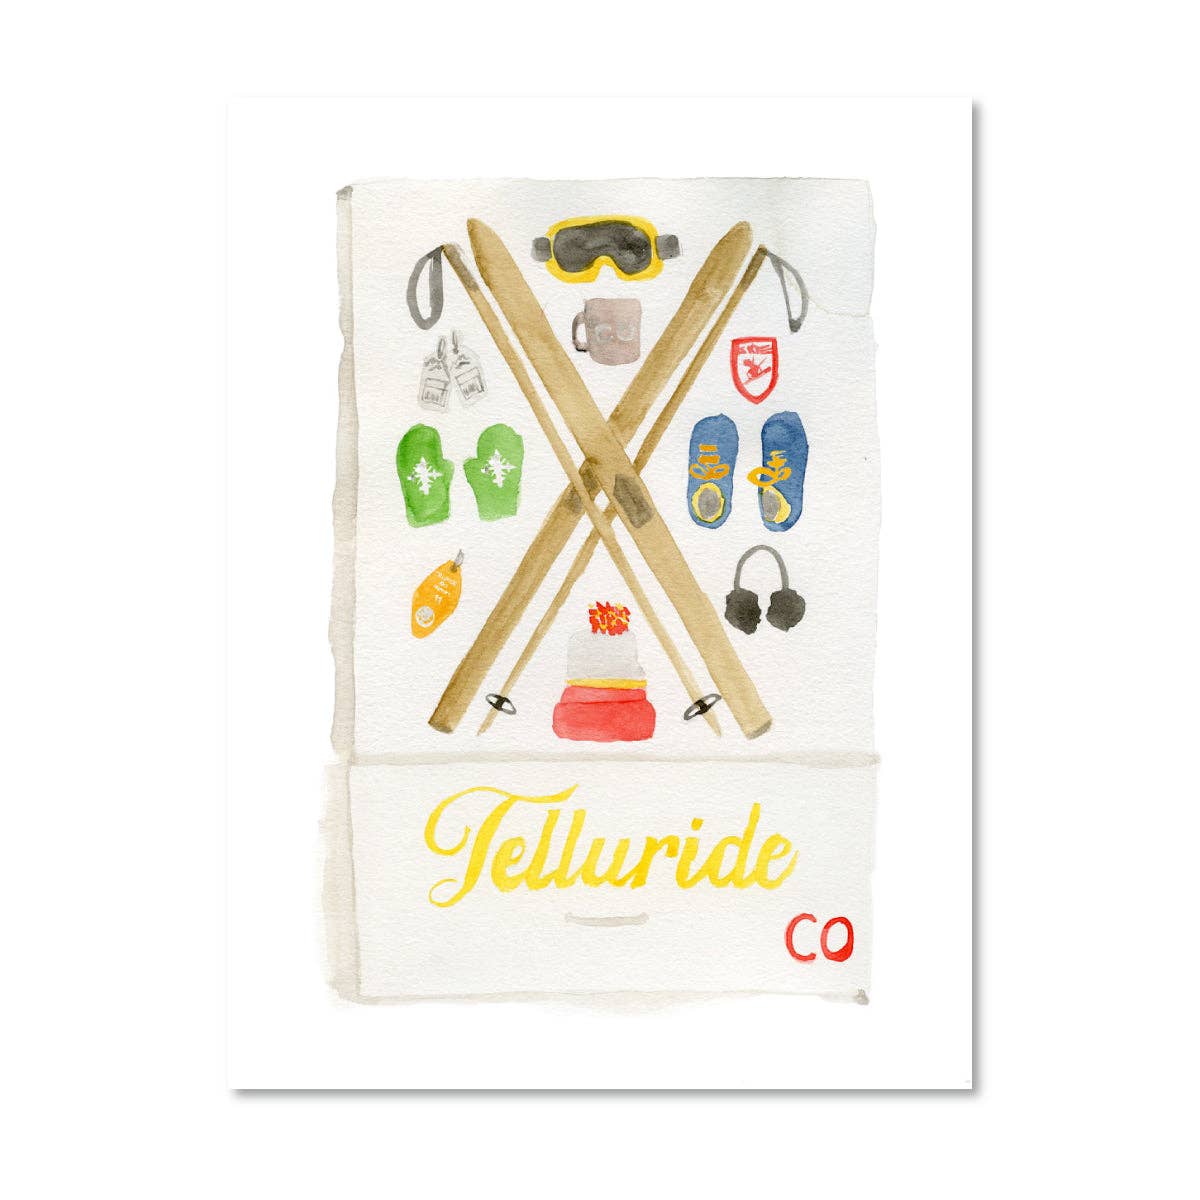 Telluride Matchbook Watercolor Print: 5" x 7" PRINT ONLY - The Preppy Bunny